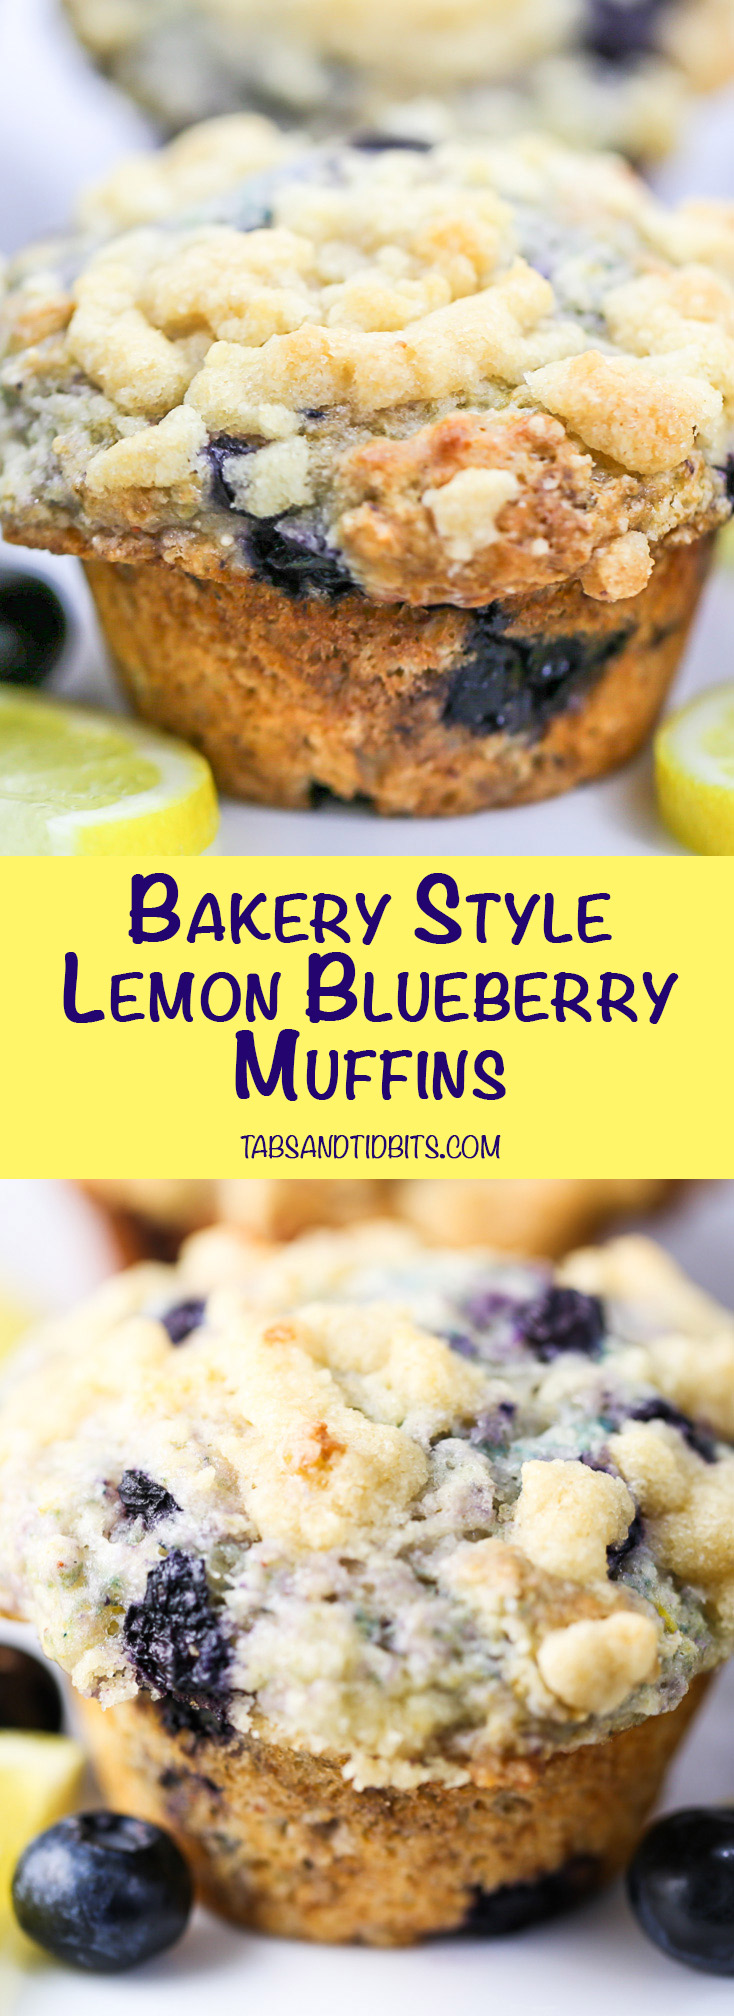 Bakery Style Lemon Blueberry Muffins - Tender bakery style muffins filled with blueberries and lemon zest and topped with a sweet and buttery streusel topping.